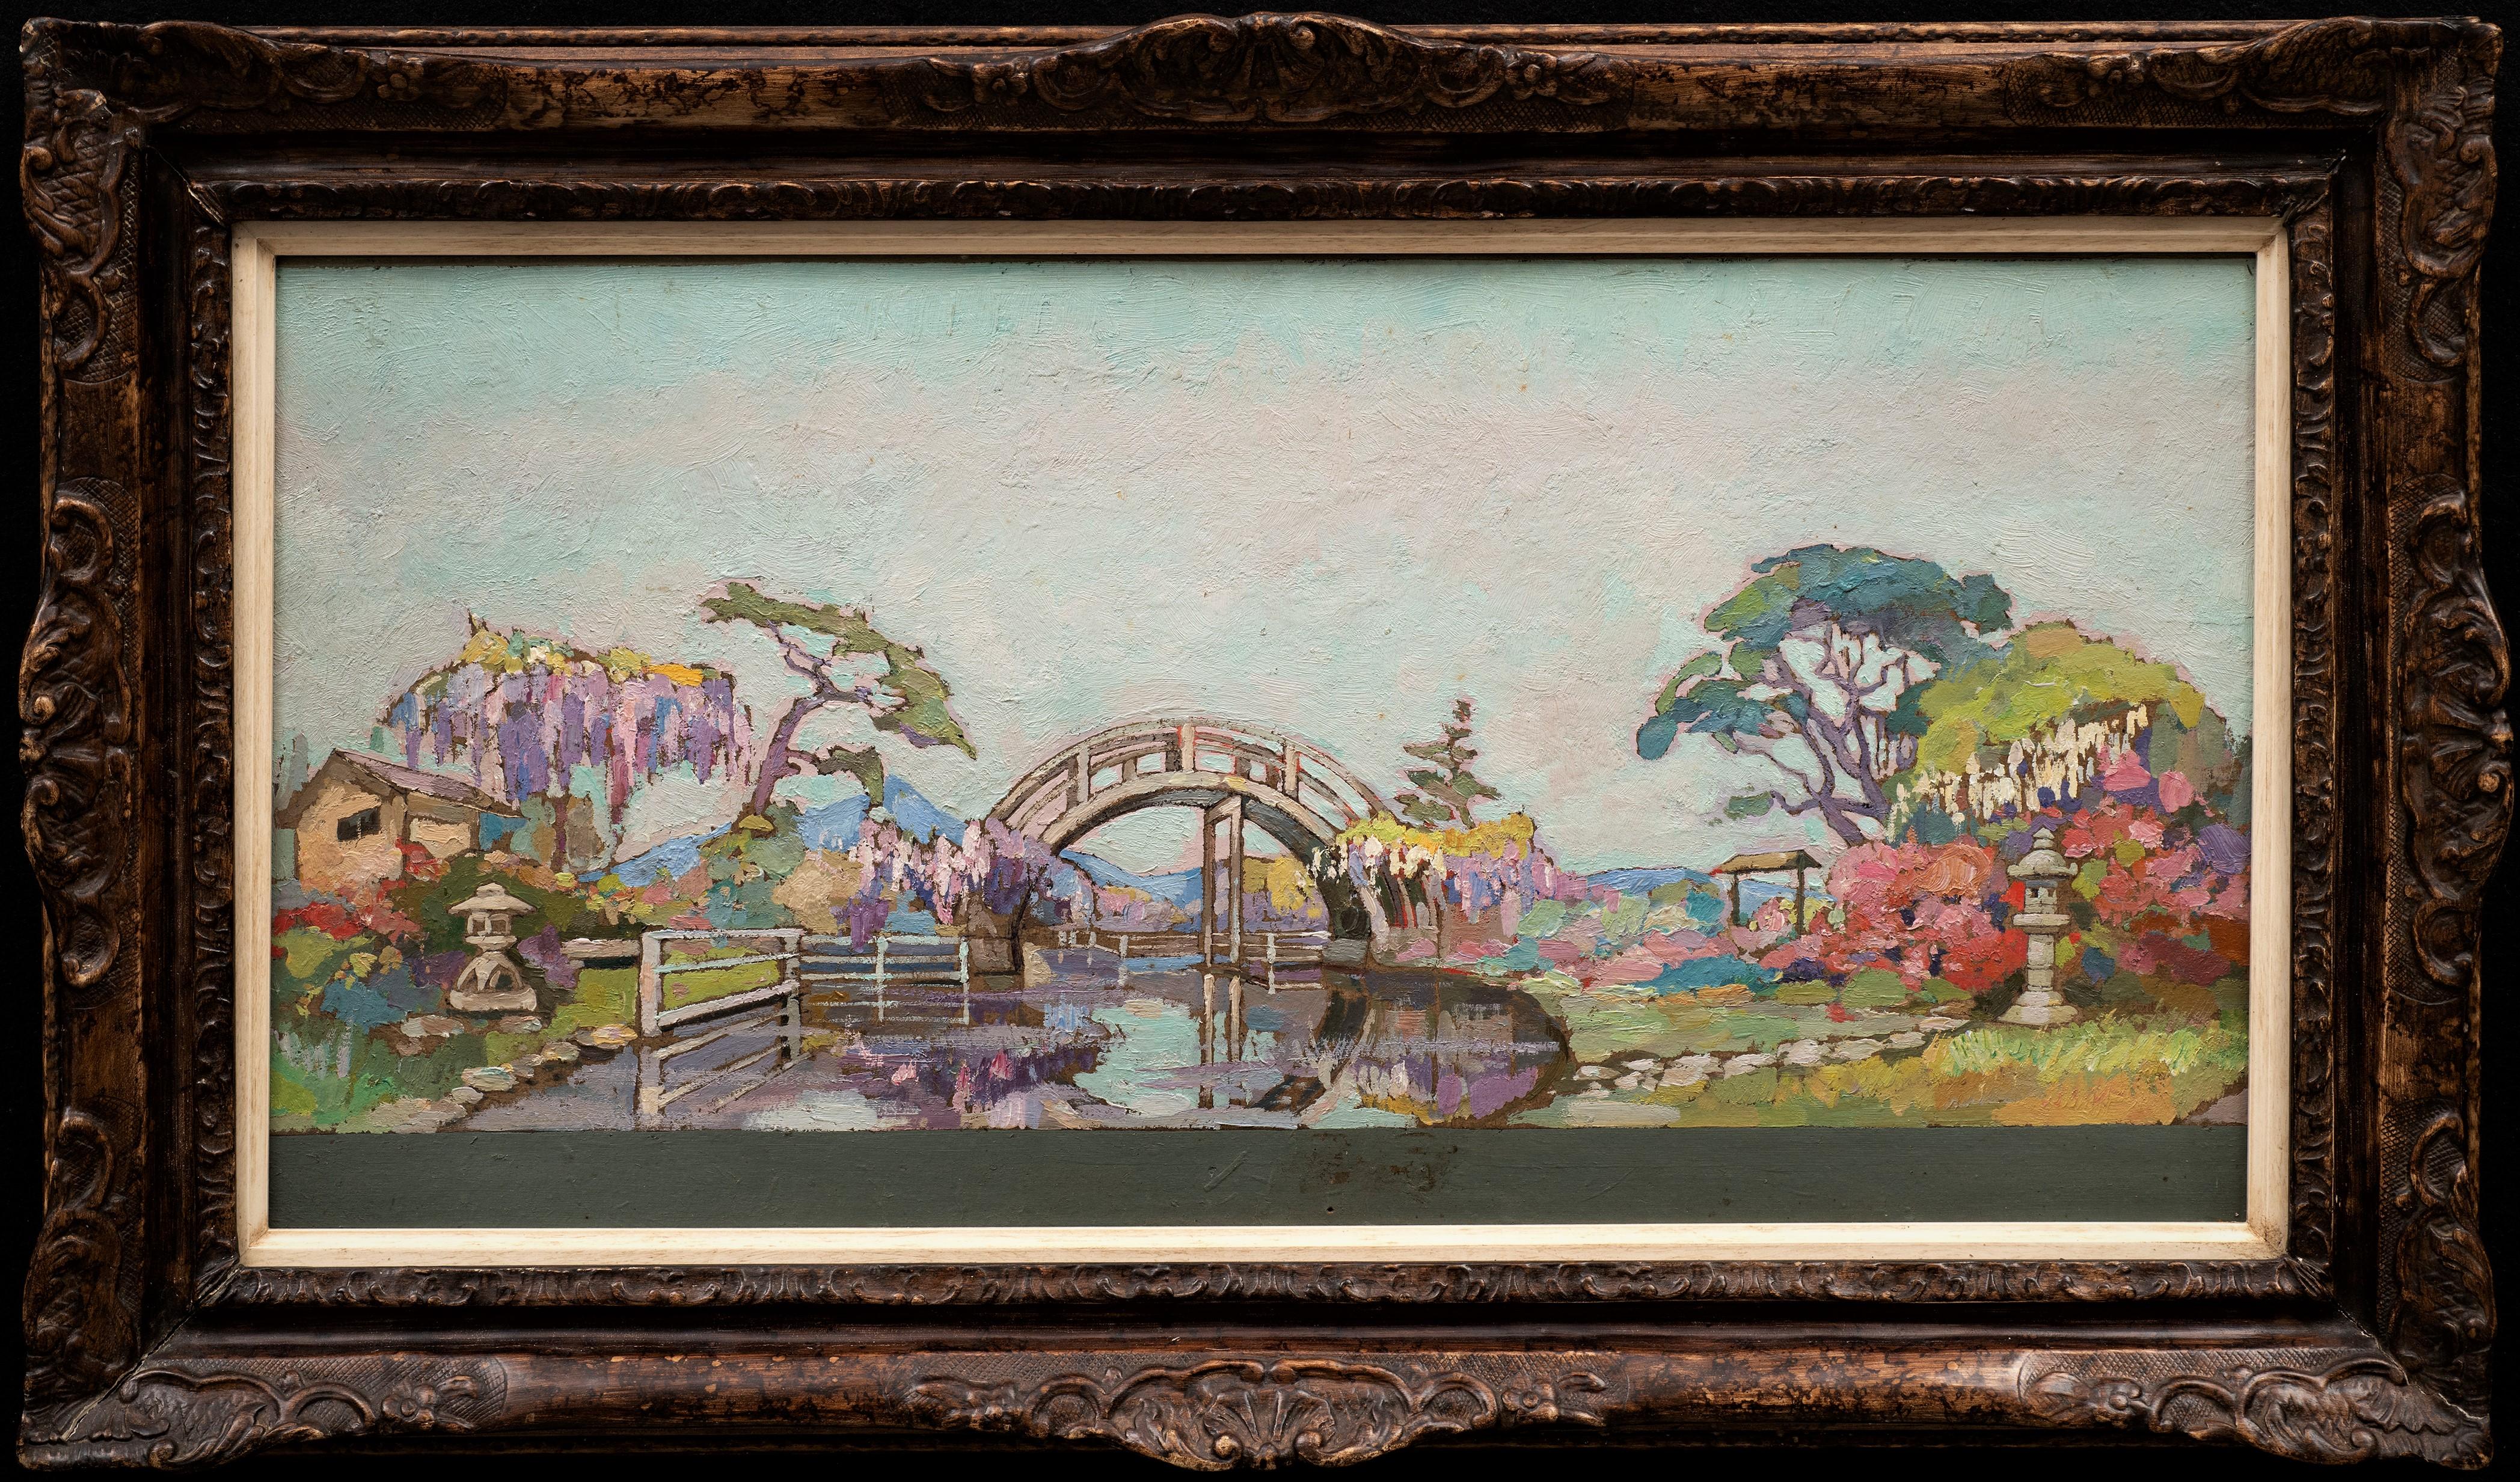 "The Japanese Bridge, 1928" 
François Beauck (Belgian, 1876-1946)
Oil on cardboard
Signed and dated with inscriptions on the back
27.25 x 13.5 (33 x 19.33 frame) inches

The inscription on the back reads:
"To Monsieur P. Deneyer, as a token of